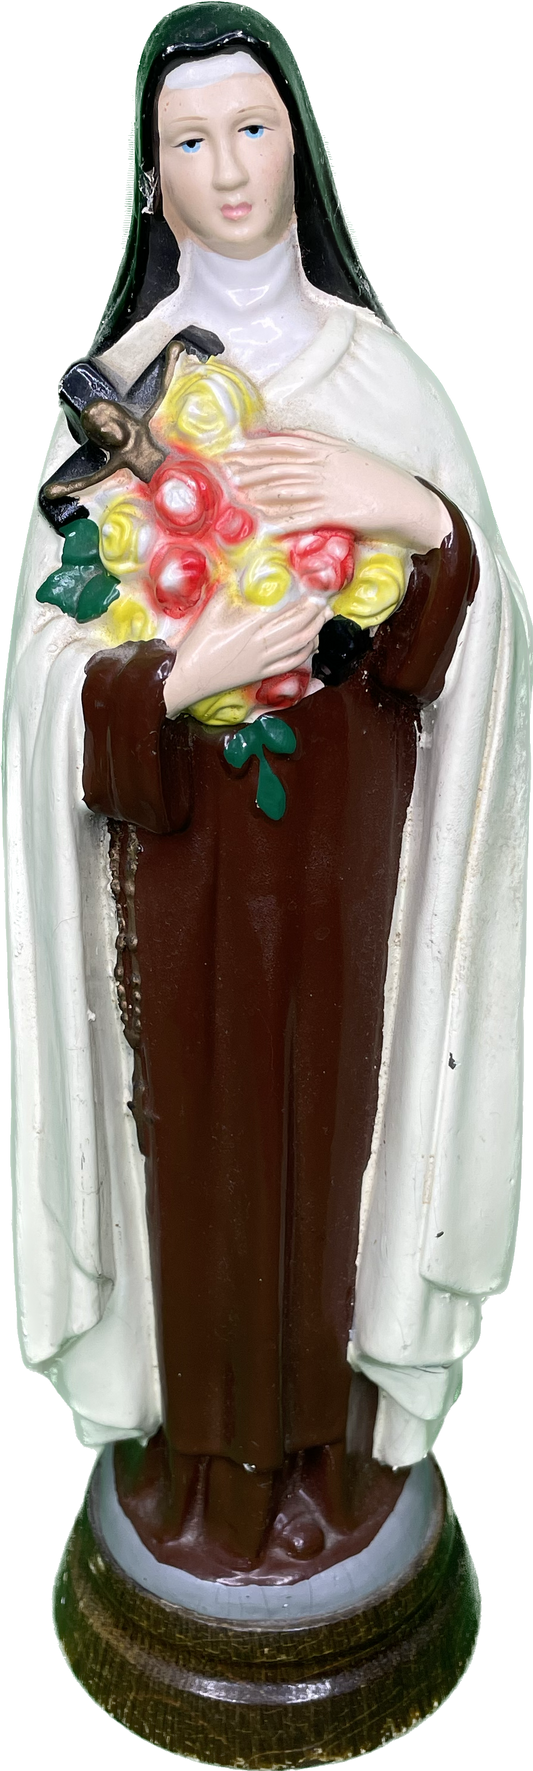 Vintage 10” ST THERESE OF LISIEUX Carved Wood Religious Statue Italy